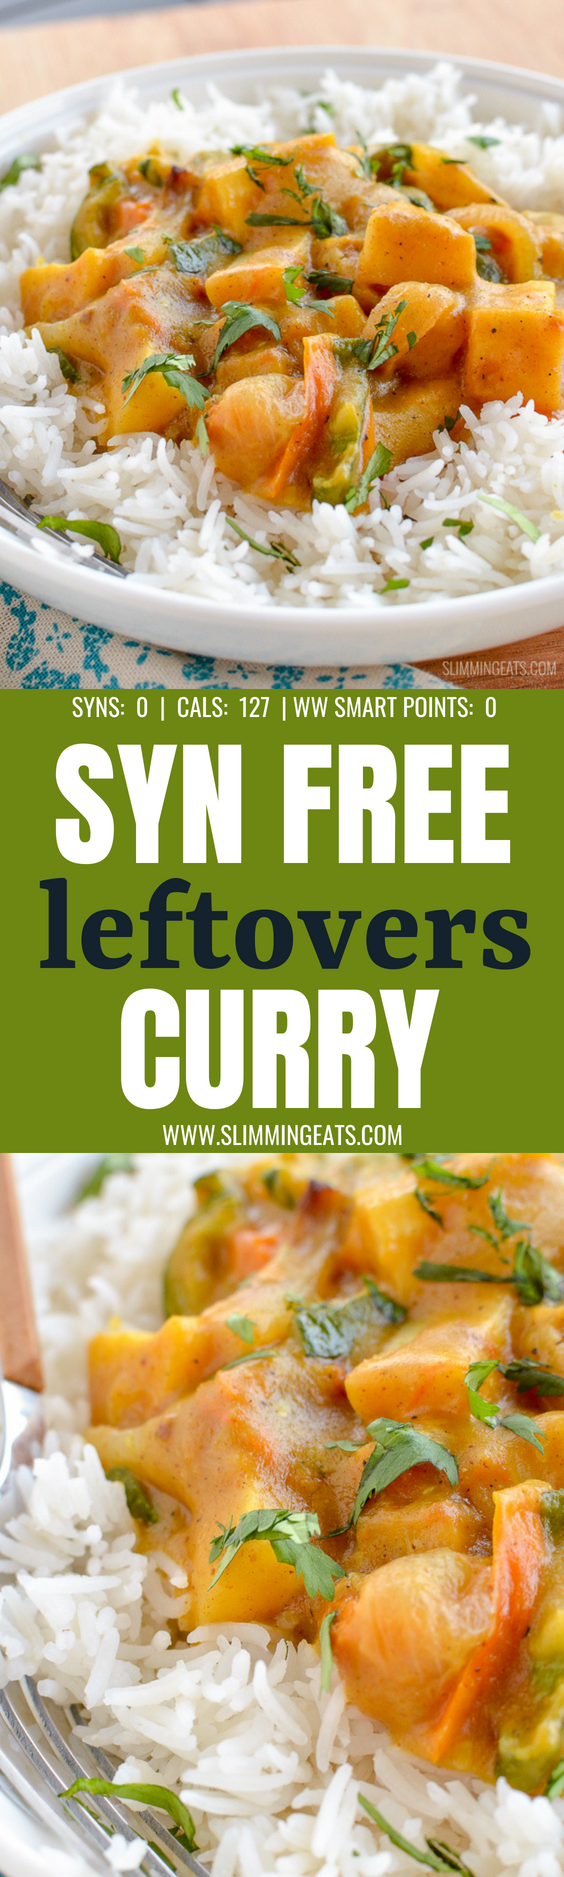 Syn Free Quick Leftovers Curry - The perfect recipe for using up any leftover vegetables. | gluten free, dairy free, vegan, Slimming World and Weight Watchers friendly